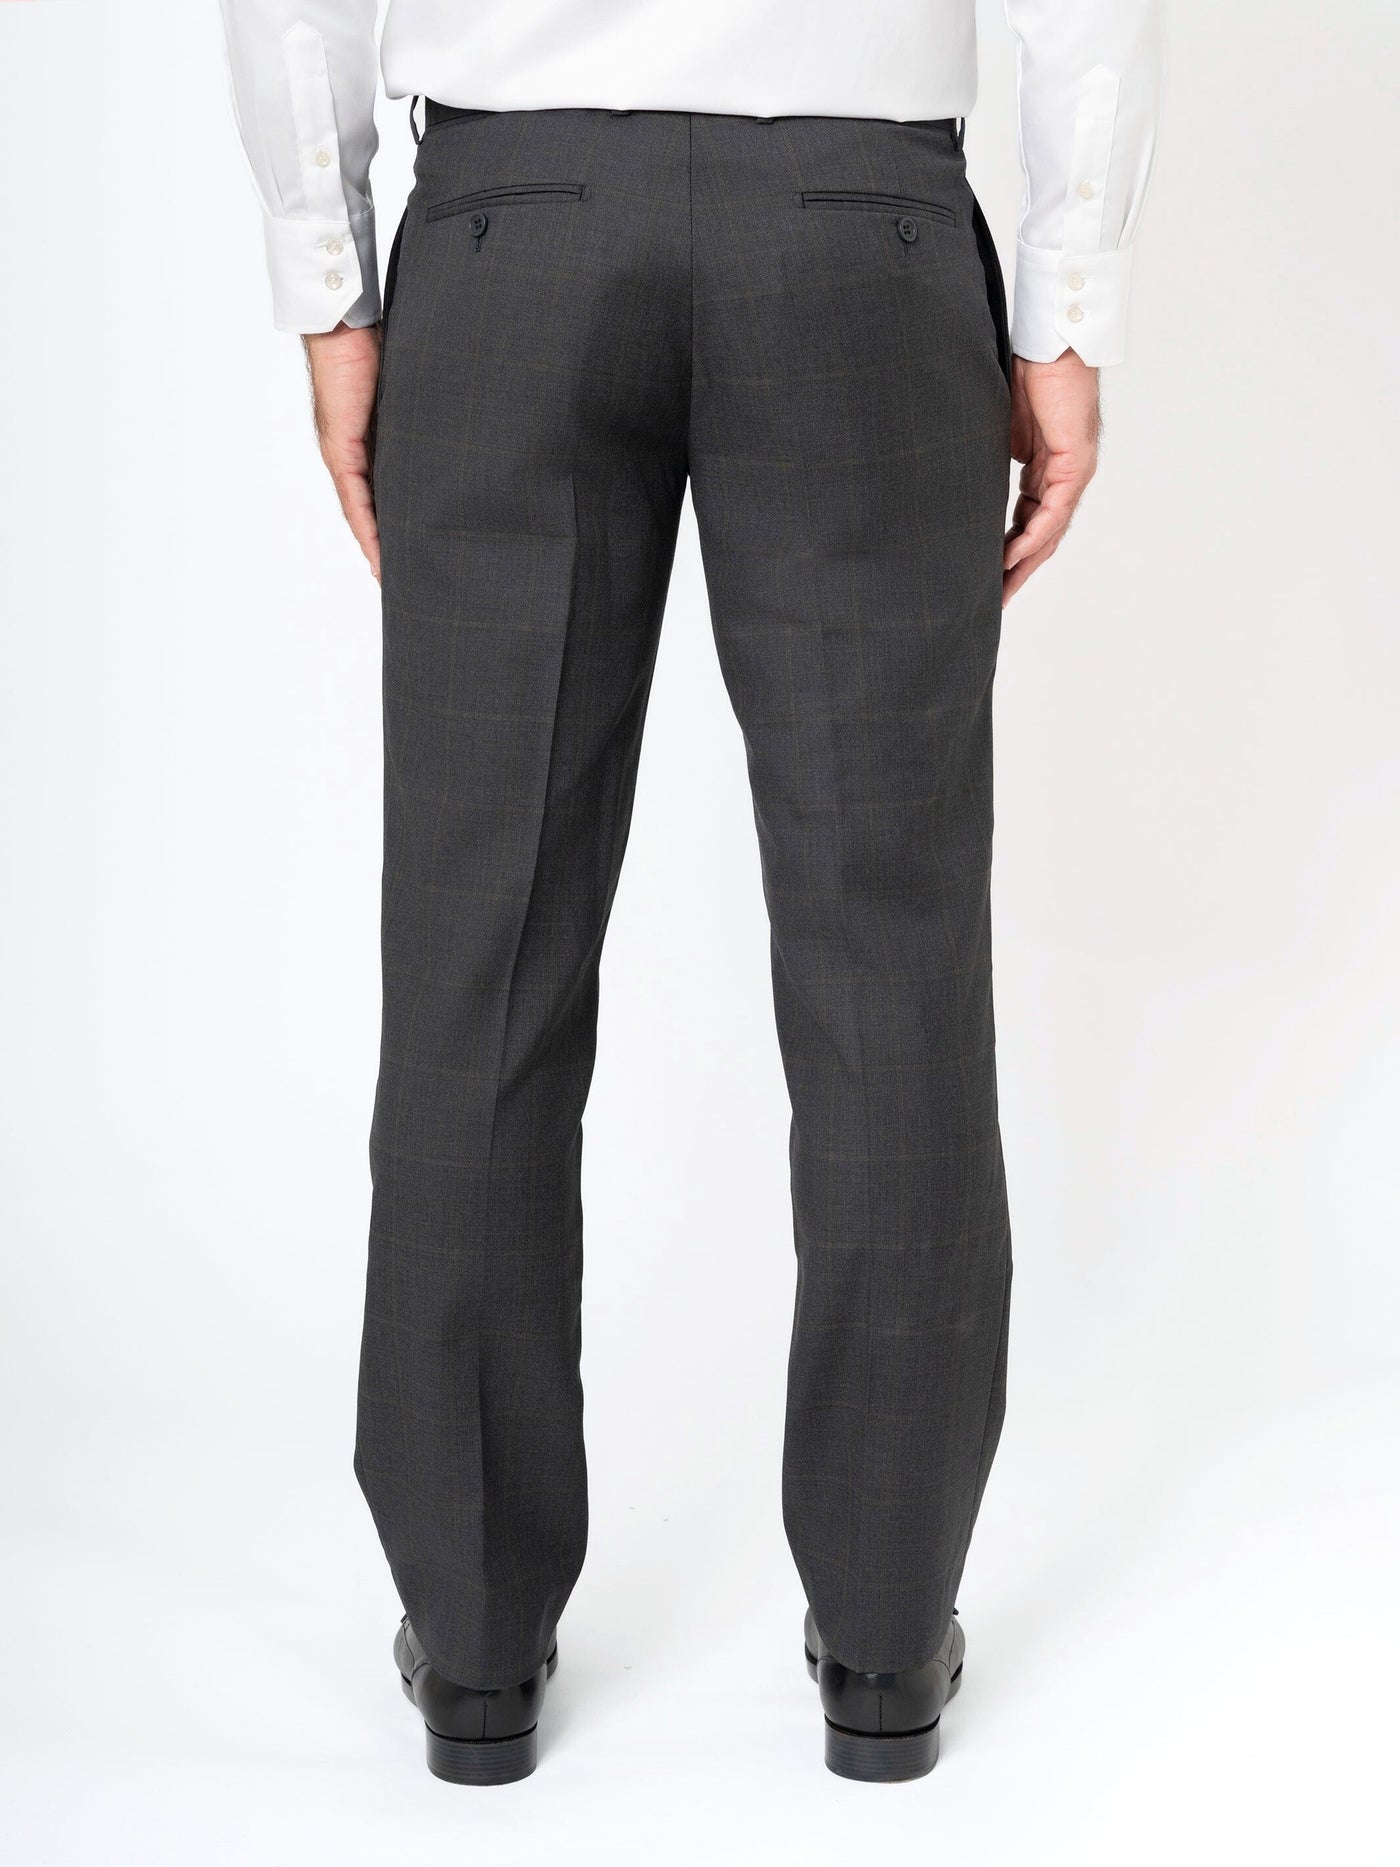 Charcoal with Cognac Windowpane Suit